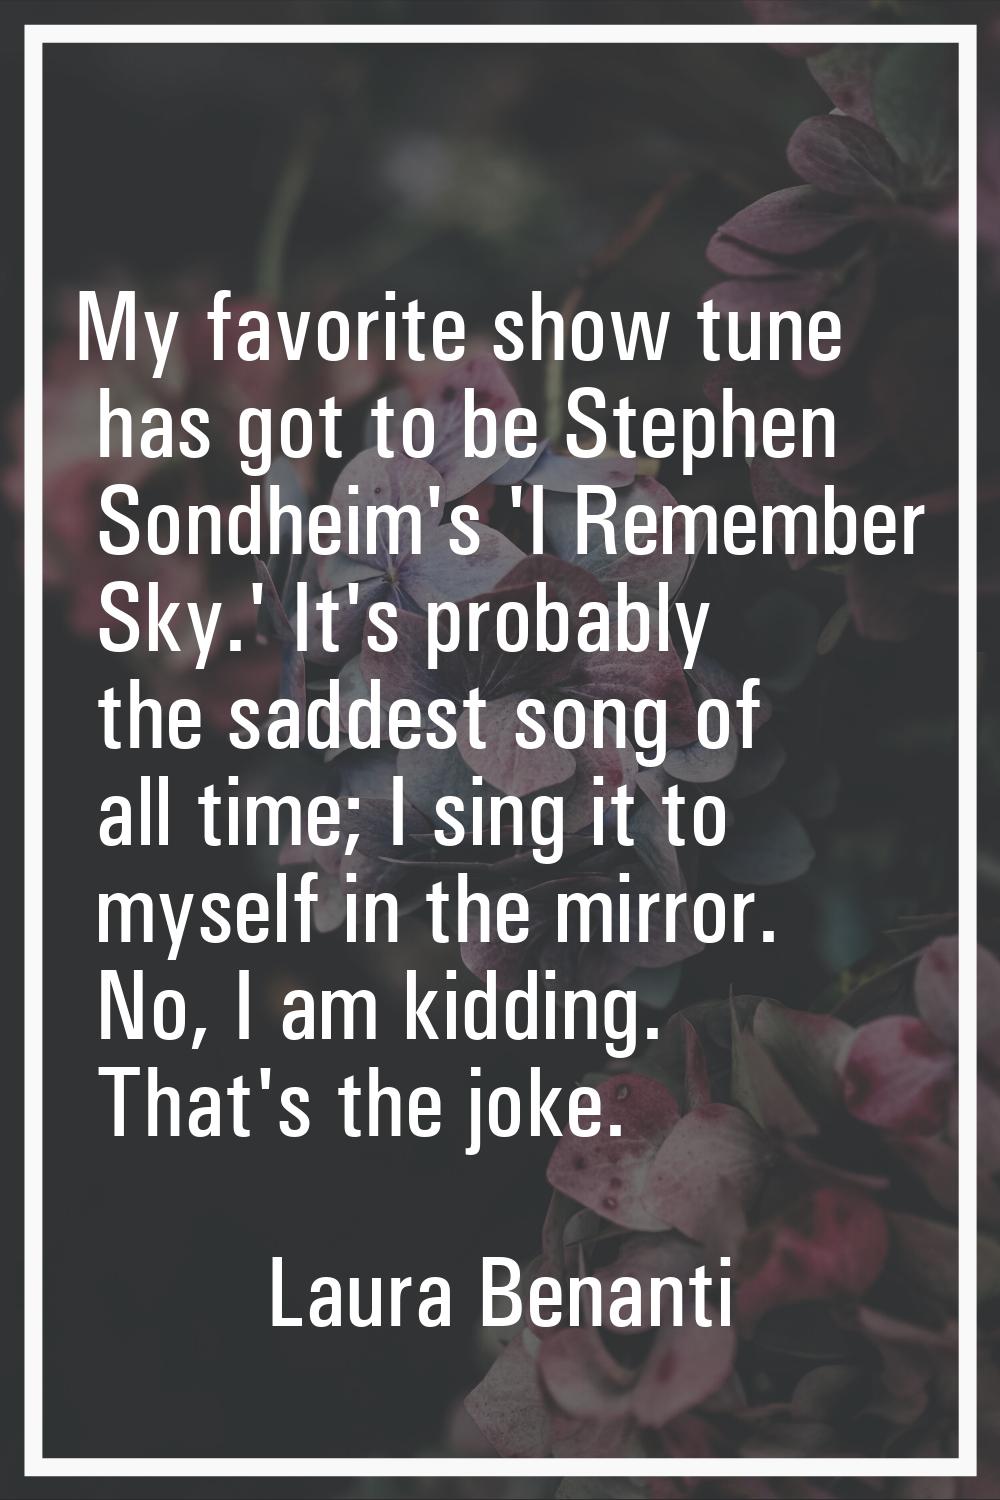 My favorite show tune has got to be Stephen Sondheim's 'I Remember Sky.' It's probably the saddest 